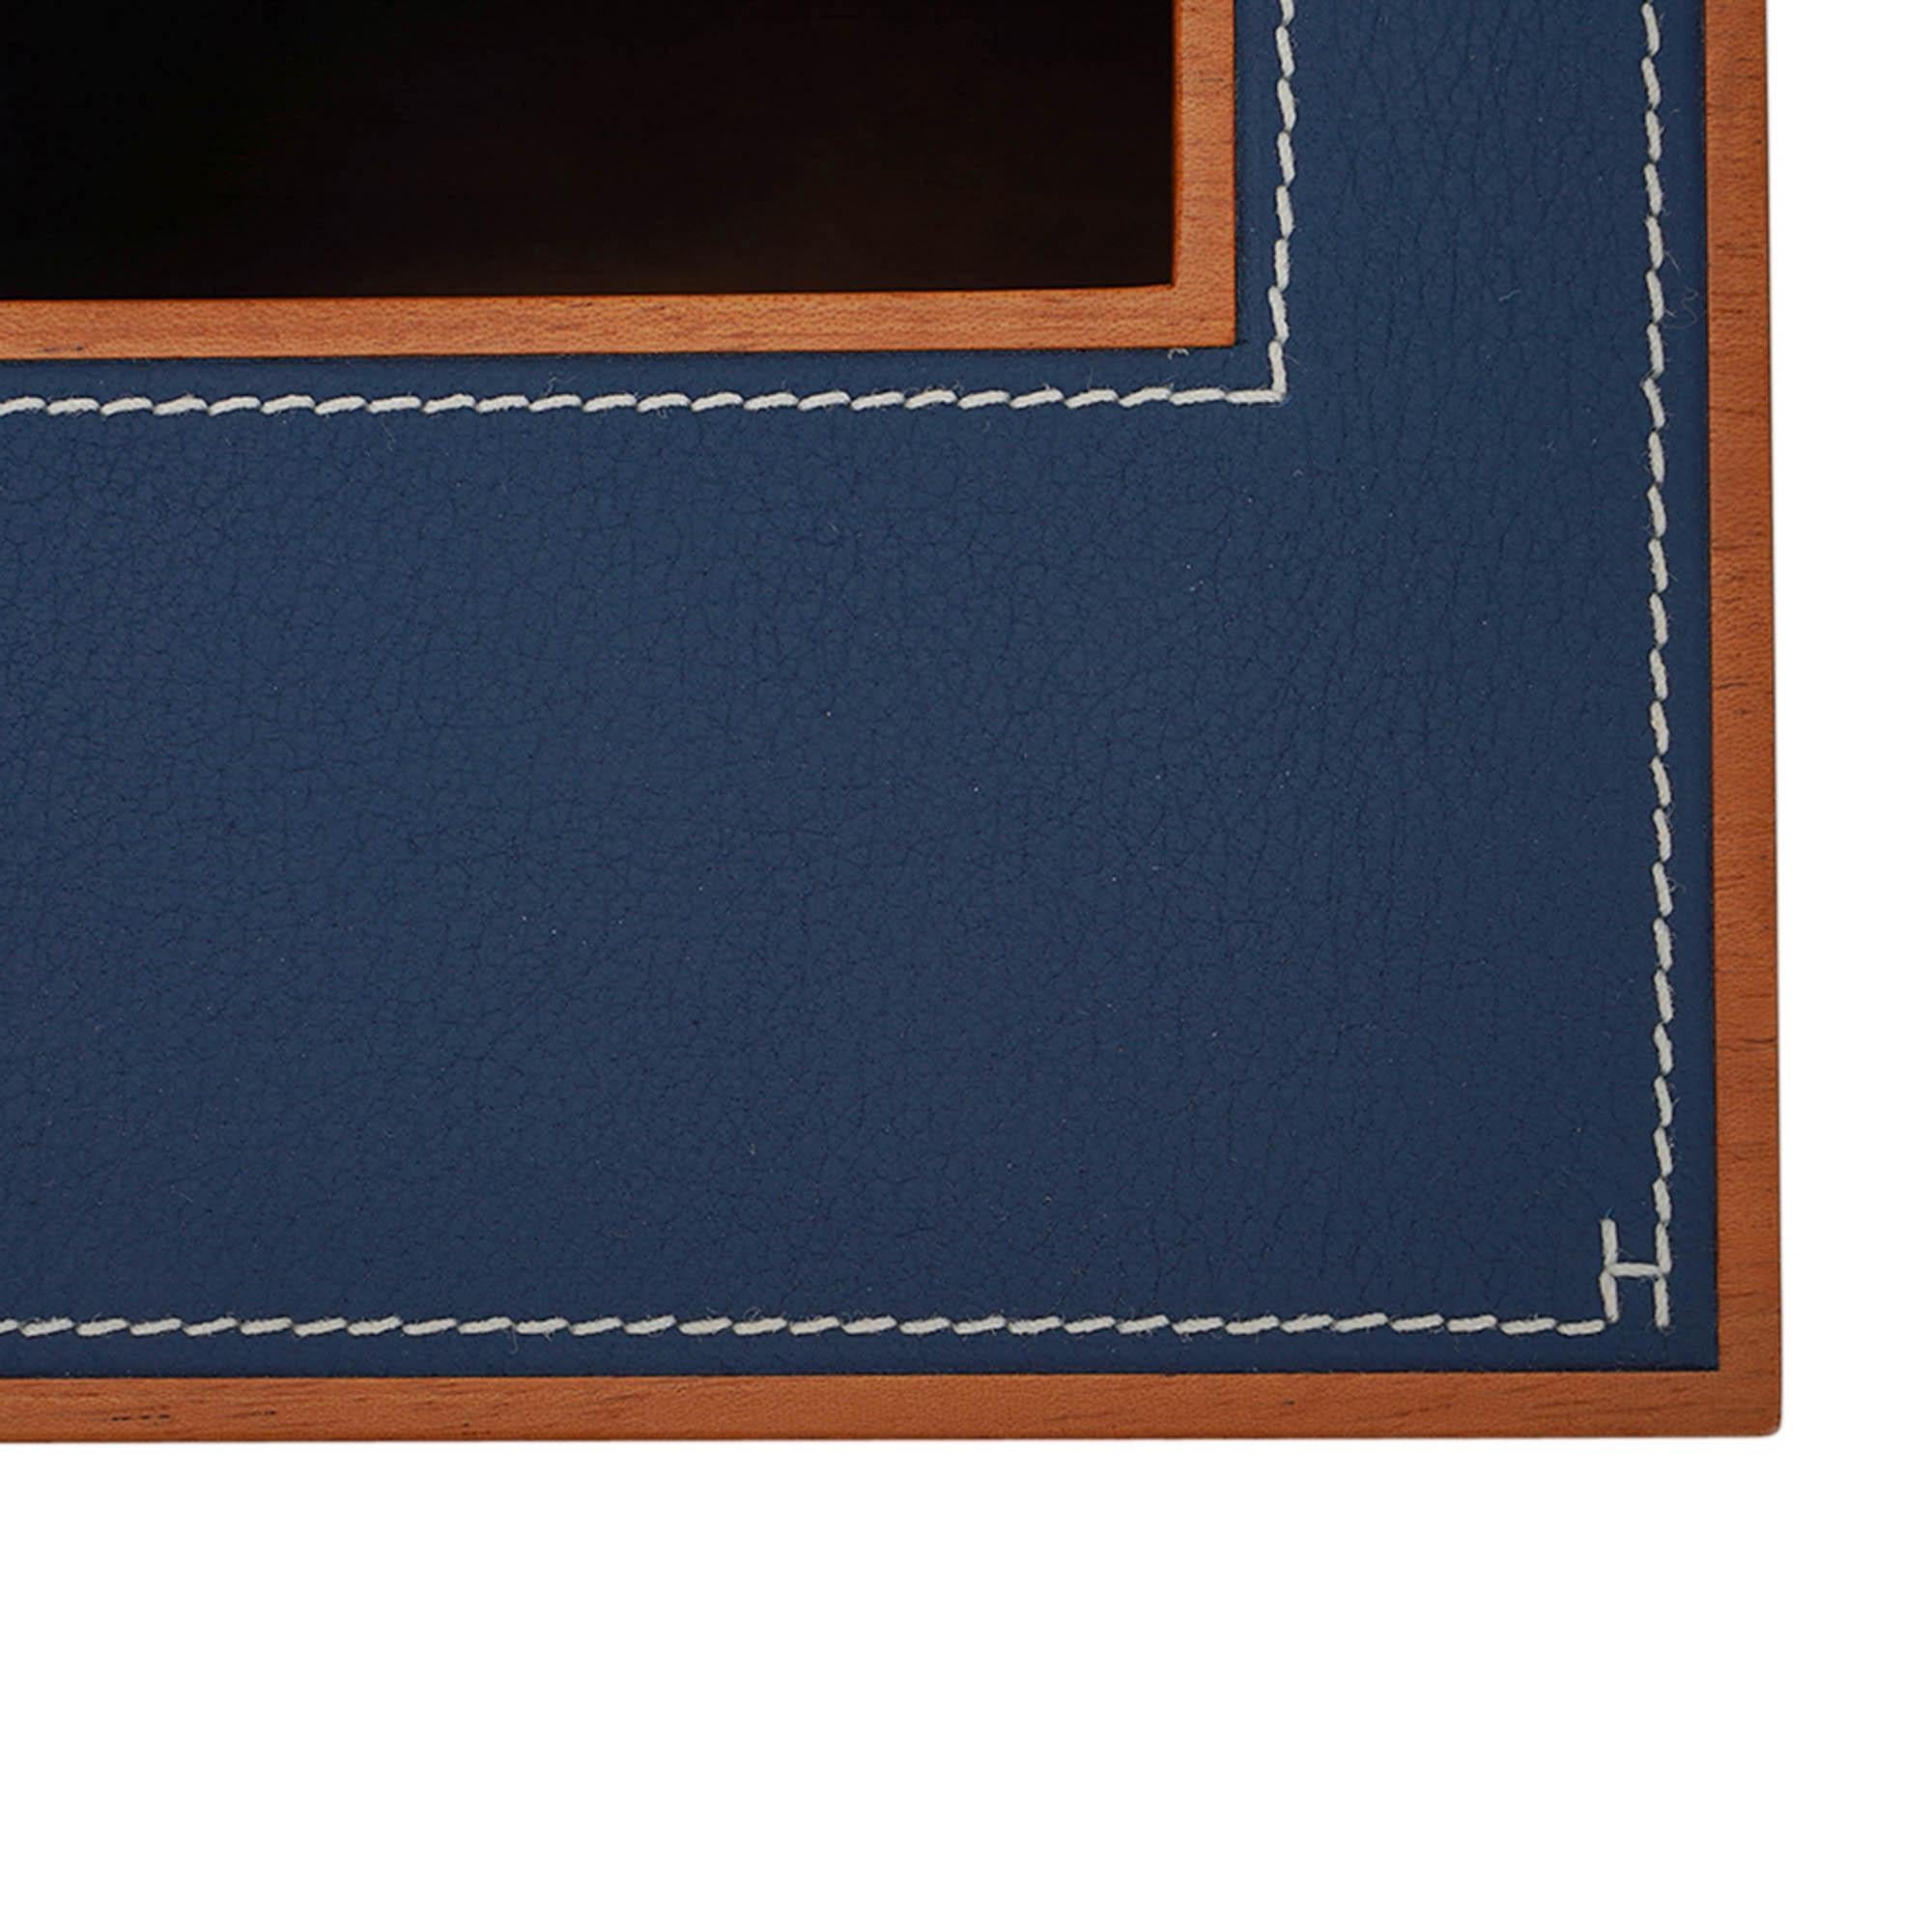 Mightychic offers an Hermes Pleiade Square Tissue Box featured in Mahogany and Bleu Regate Taurillon leather.
Modern and elegant with white topstitch on the leather.
Each box is signed with a H in a corner in white thread.
Comes with signature